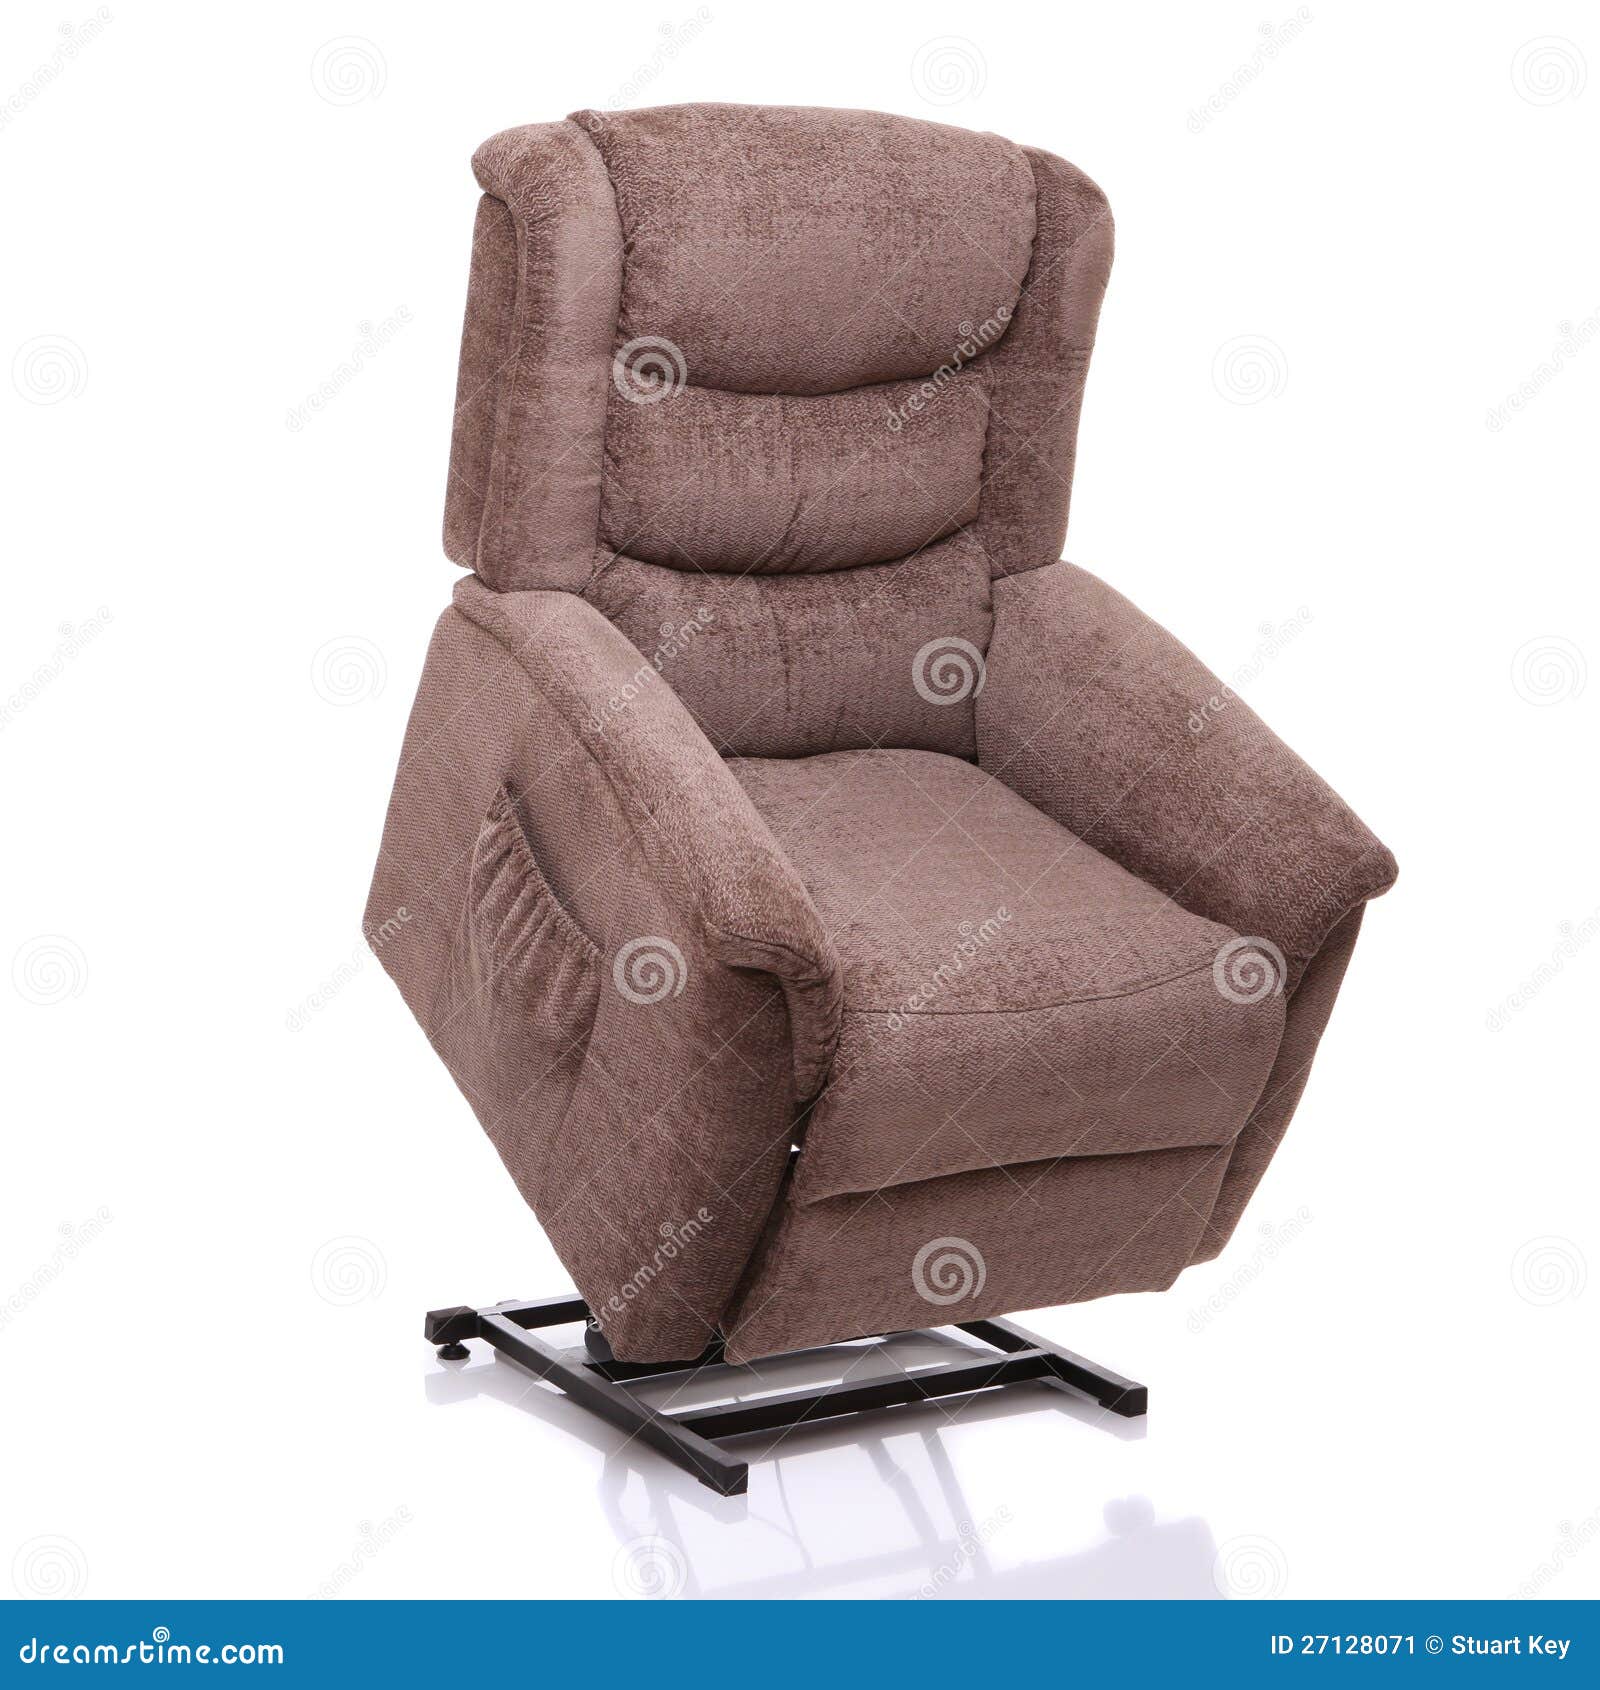 rise and recline chair, fully lifted.